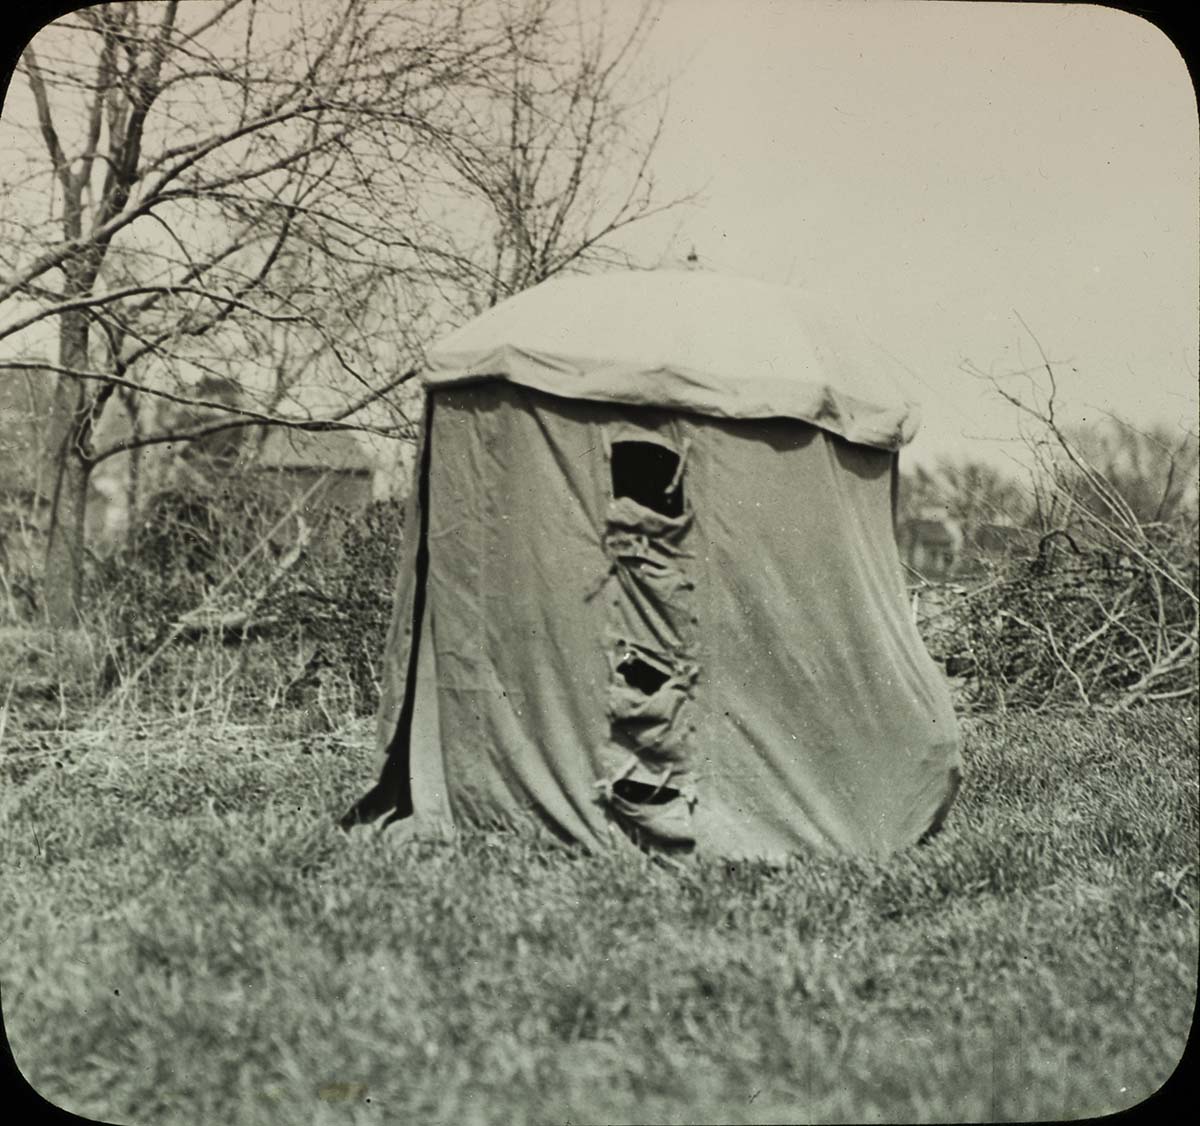 Lantern slide and photograph of an umbrella blind for photographing birds